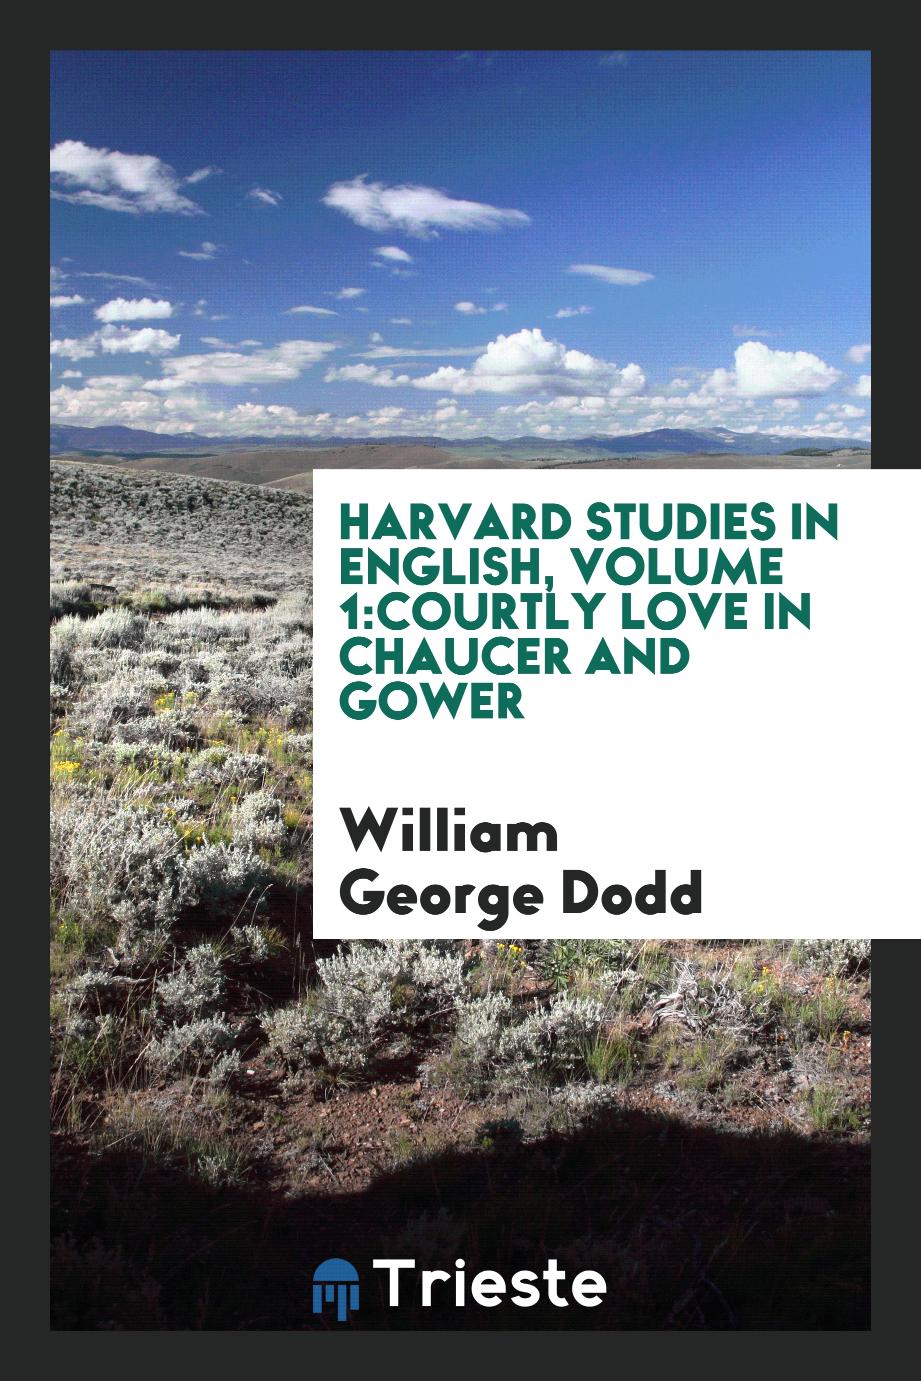 Harvard studies in english, Volume 1:Courtly love in Chaucer and Gower